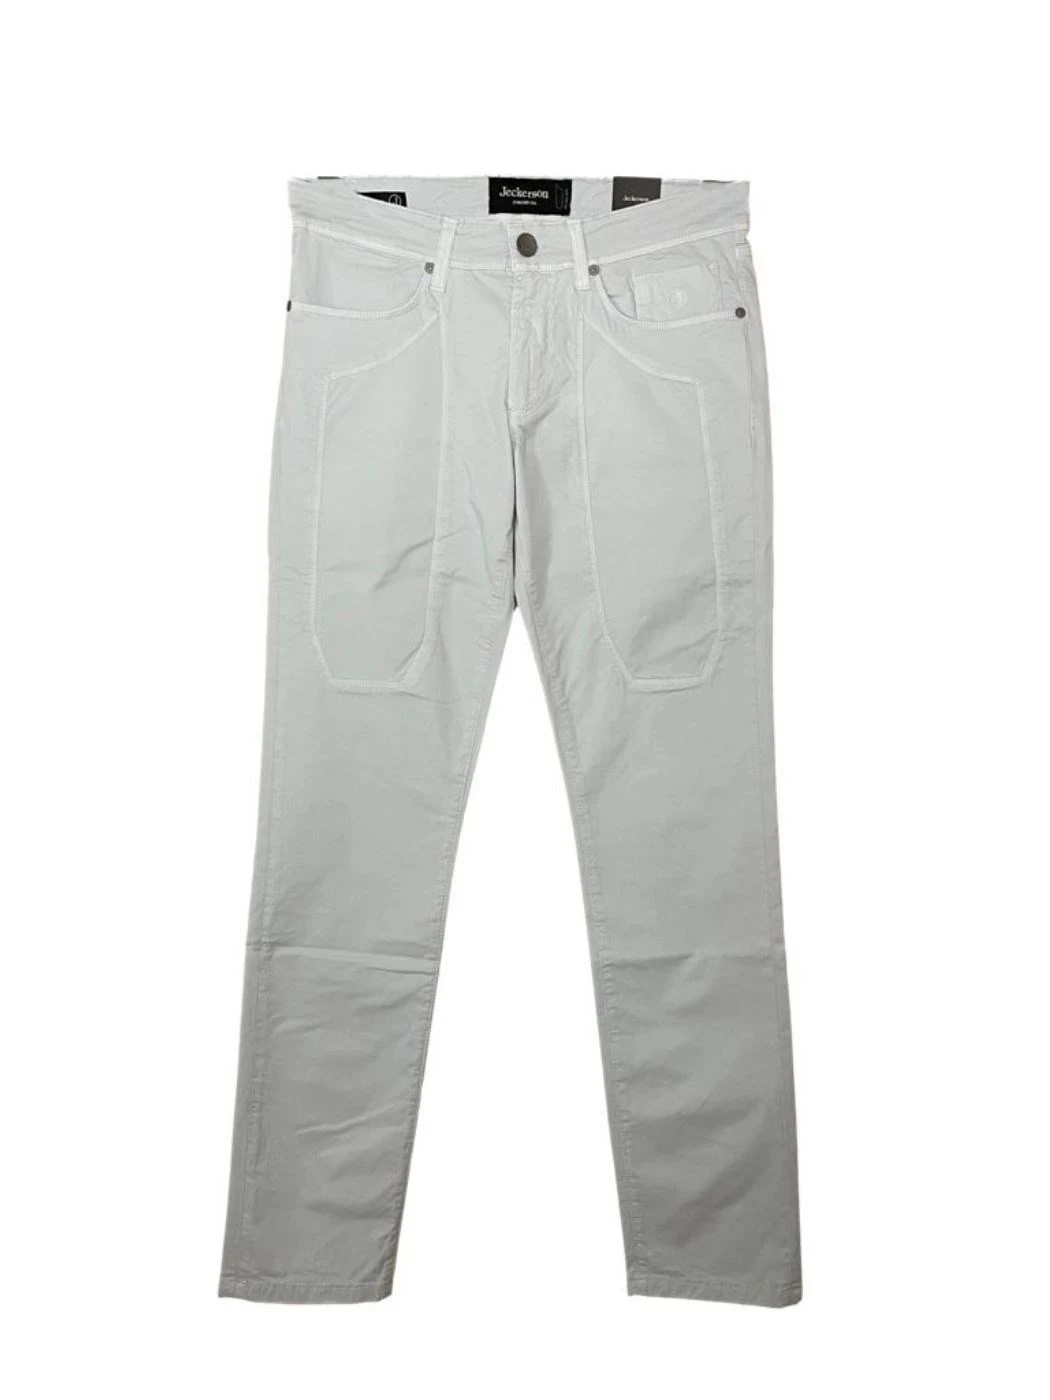 Trousers with Jeckerson patch